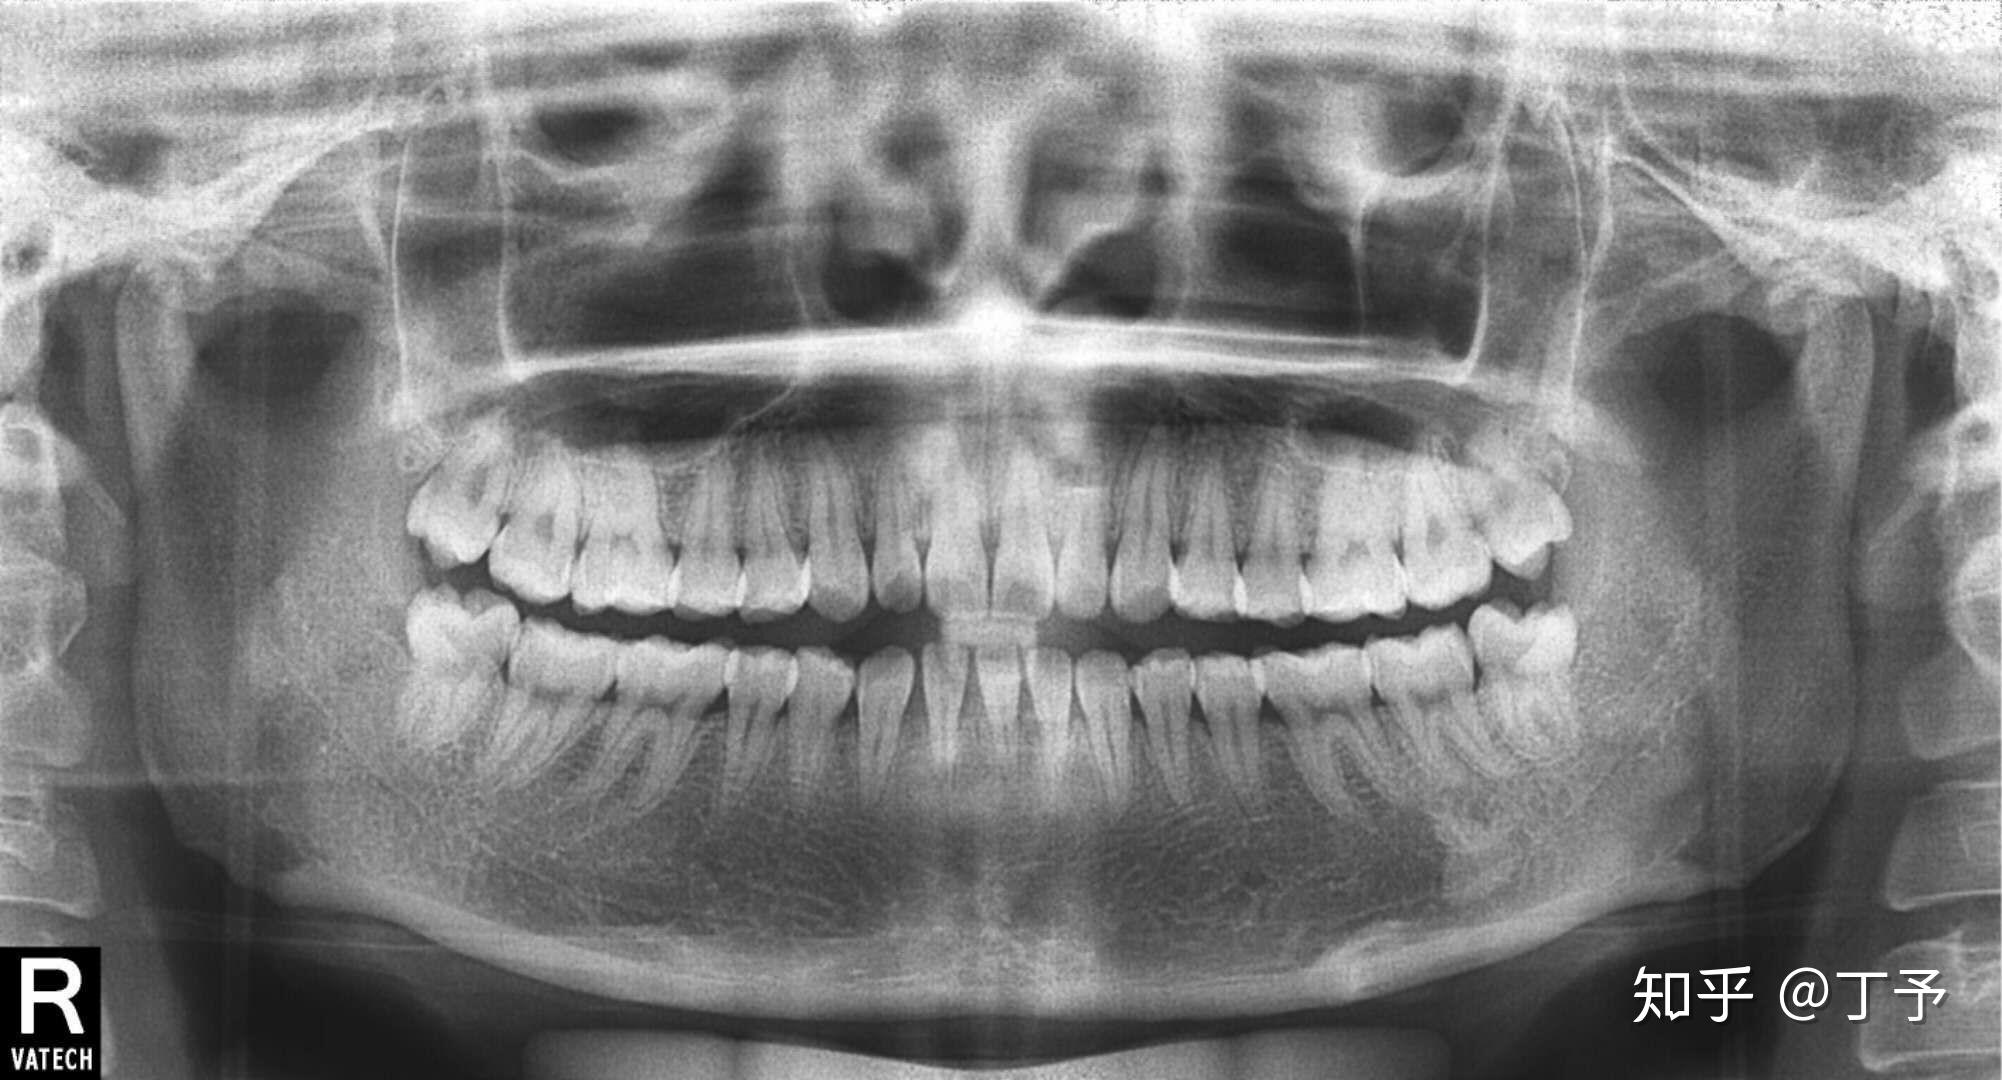 Free Missing teeth Stock Photo - FreeImages.com